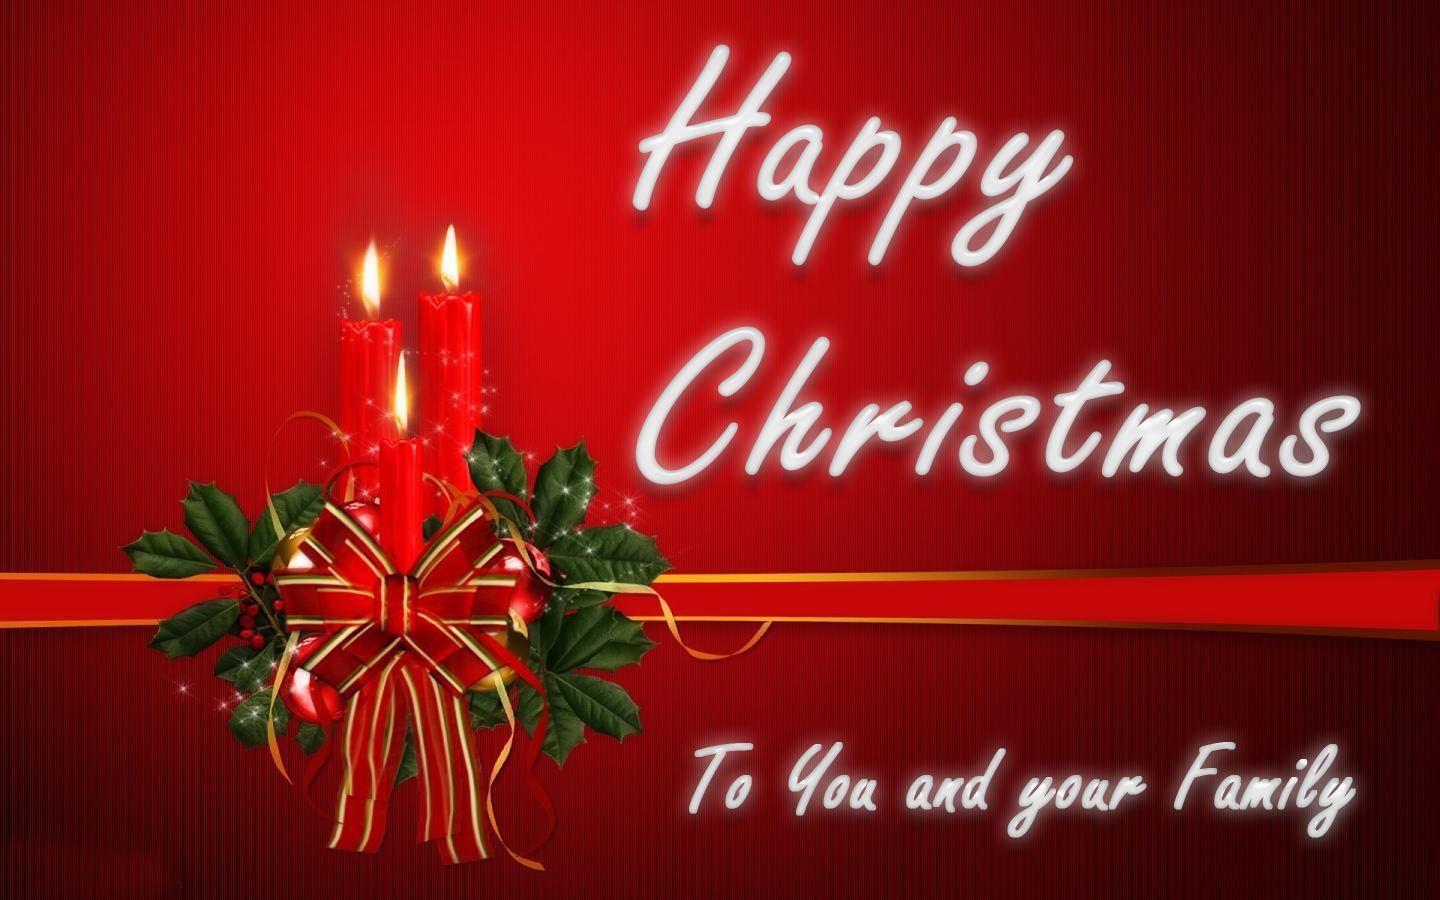 Merry Christmas Greetings Cards Image 2018 (All Time Best)